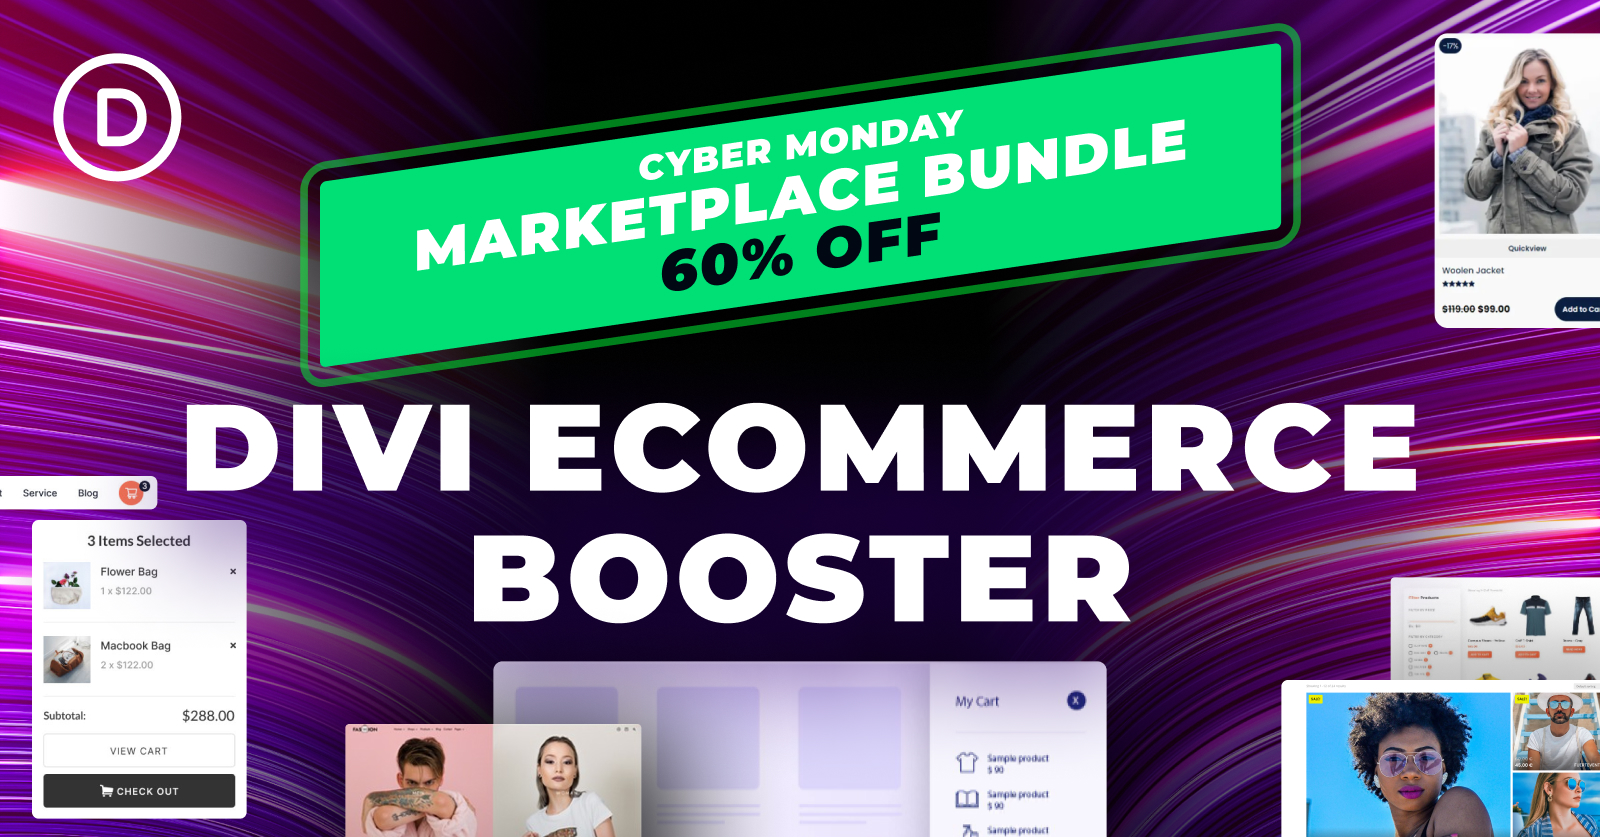 Cyber Monday Ecommerce Booster Bundle!